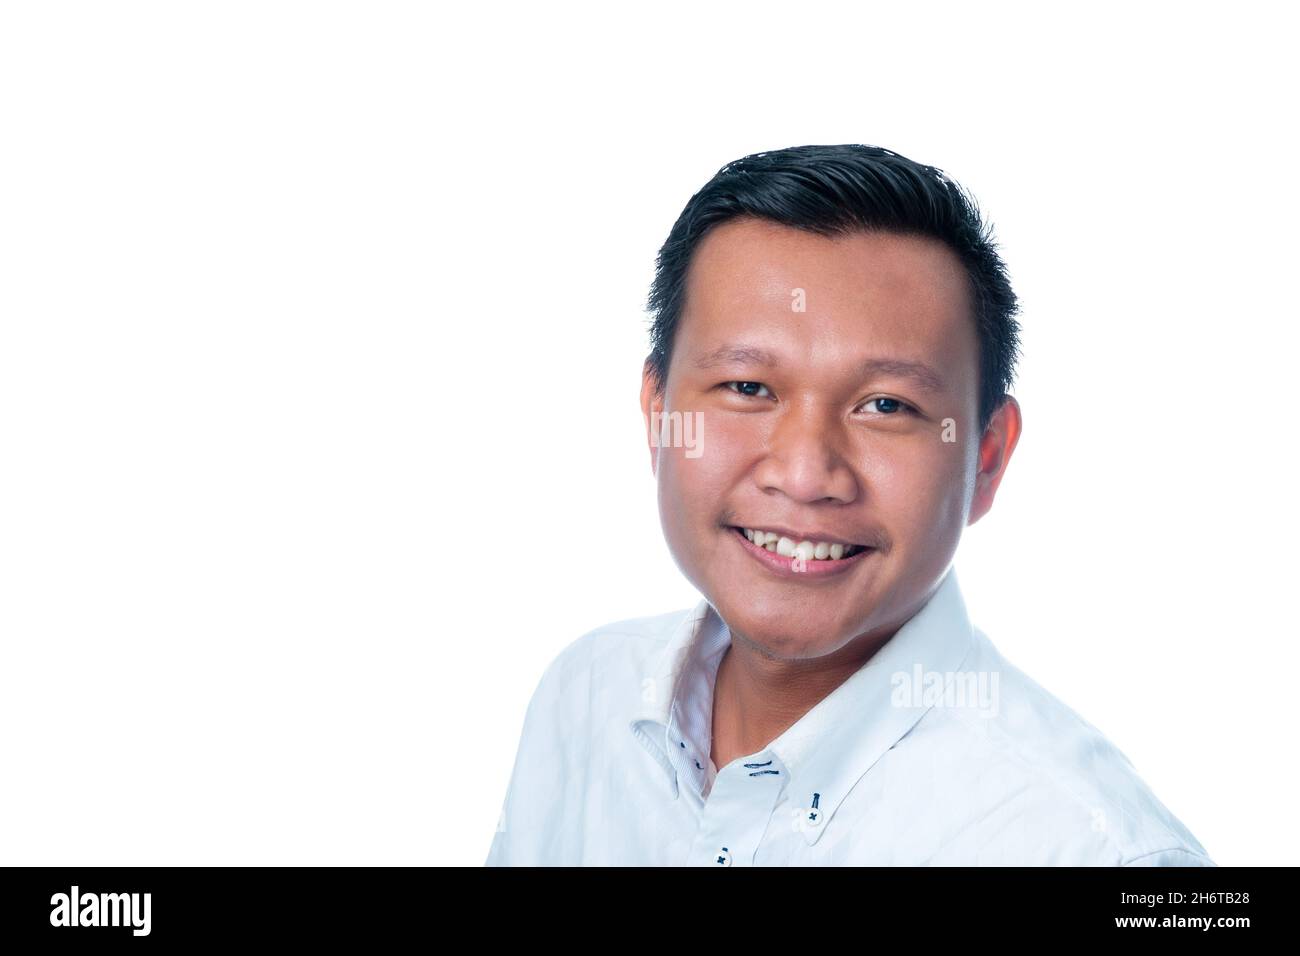 Indonesian man headshot with copy space Stock Photo